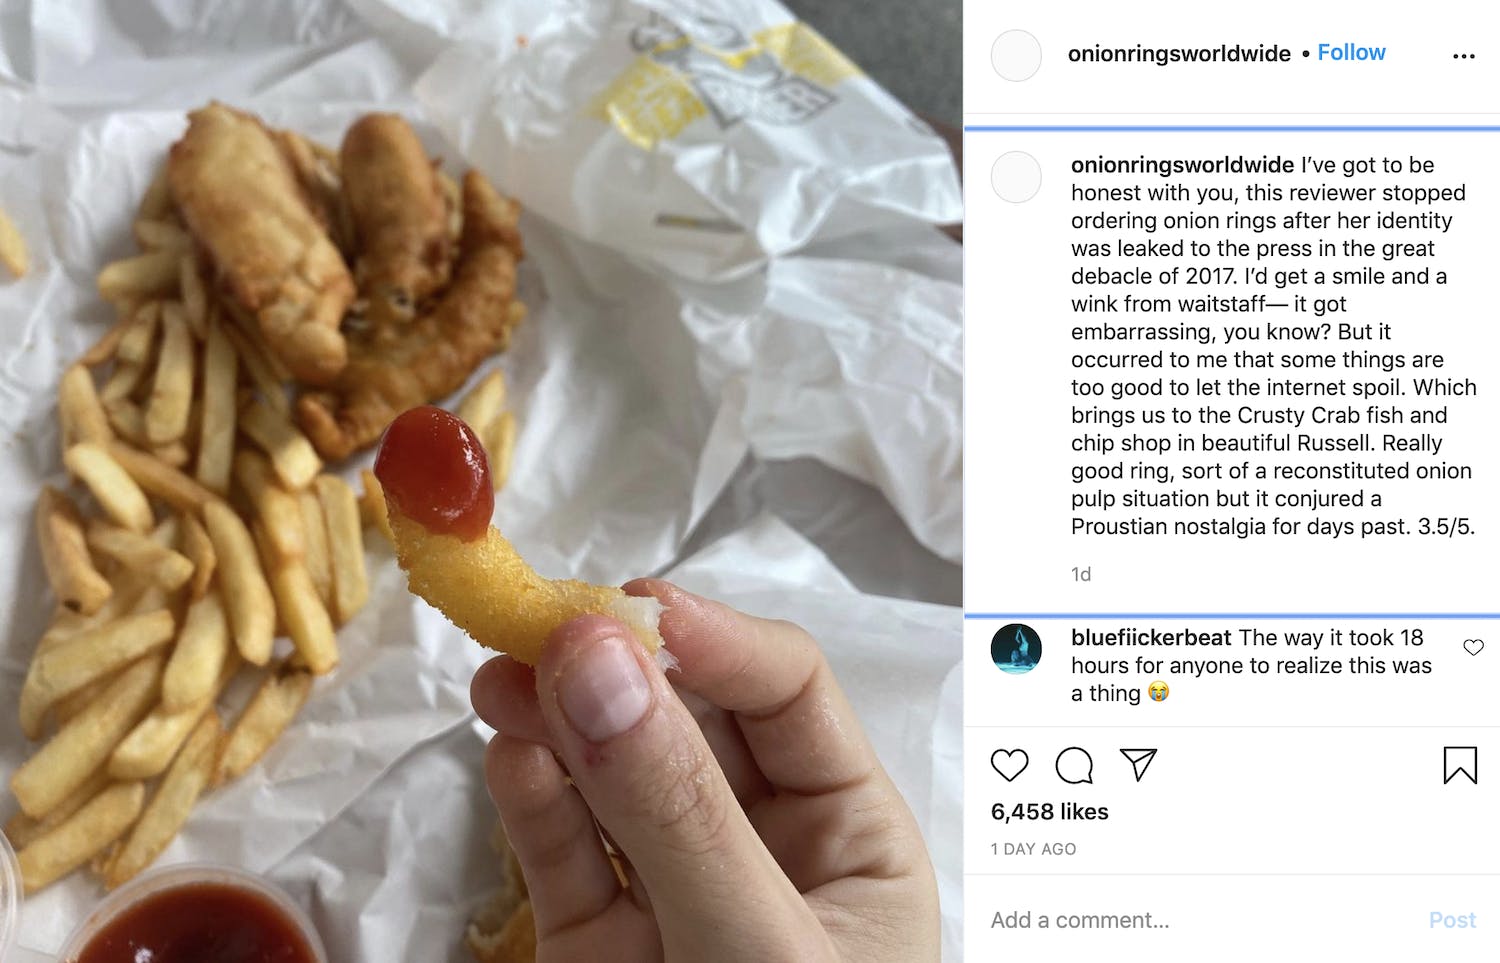 Picture of fish and chips with a hand holding part of an onion ring that's been dipped in ketchup in front of it with the caption 'I’ve got to be honest with you, this reviewer stopped ordering onion rings after her identity was leaked to the press in the great debacle of 2017. I’d get a smile and a wink from waitstaff— it got embarrassing, you know? But it occurred to me that some things are too good to let the internet spoil. Which brings us to the Crusty Crab fish and chip shop in beautiful Russell. Really good ring, sort of a reconstituted onion pulp situation but it conjured a Proustian nostalgia for days past. 3.5/5.'